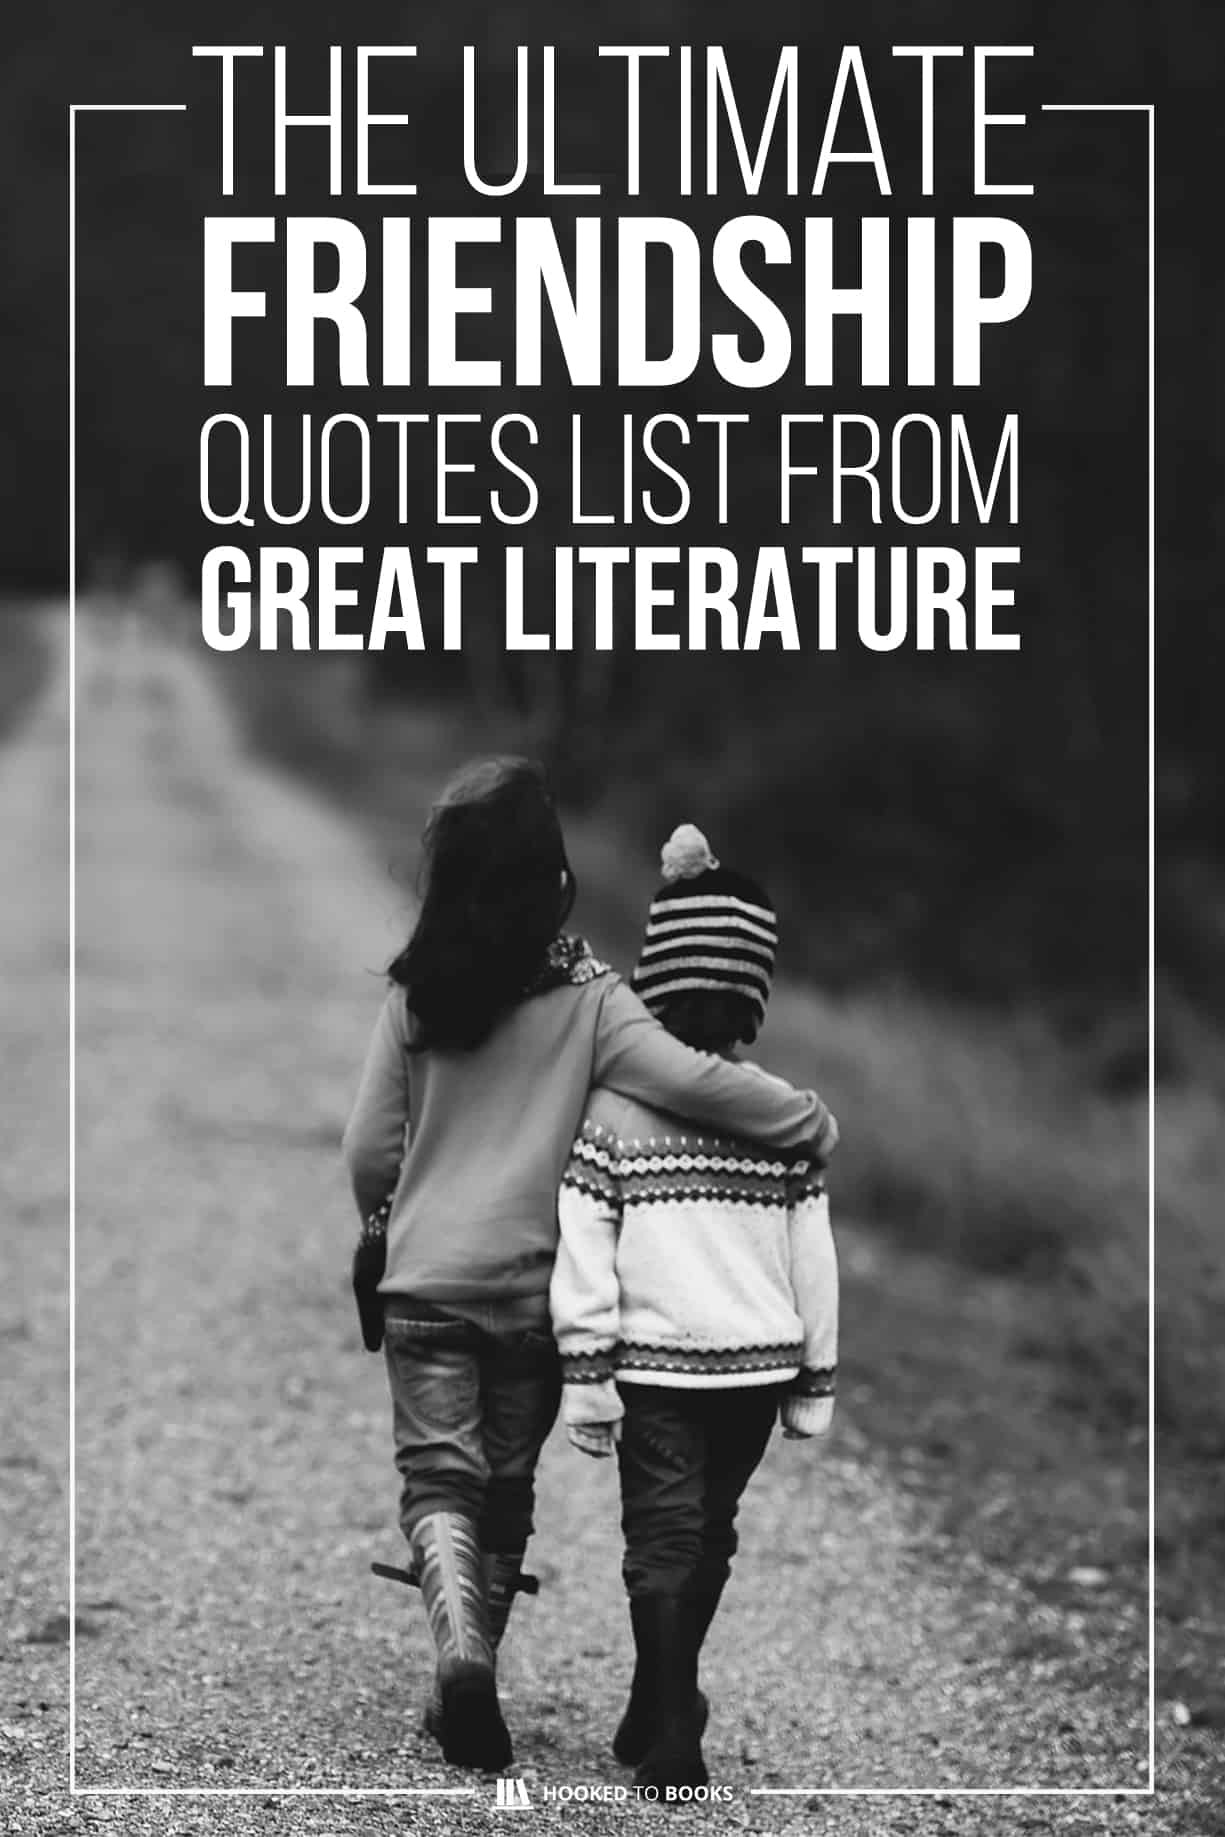 Literary Quotes About Friendship
 34 Classic Friendship Quotes from Literature